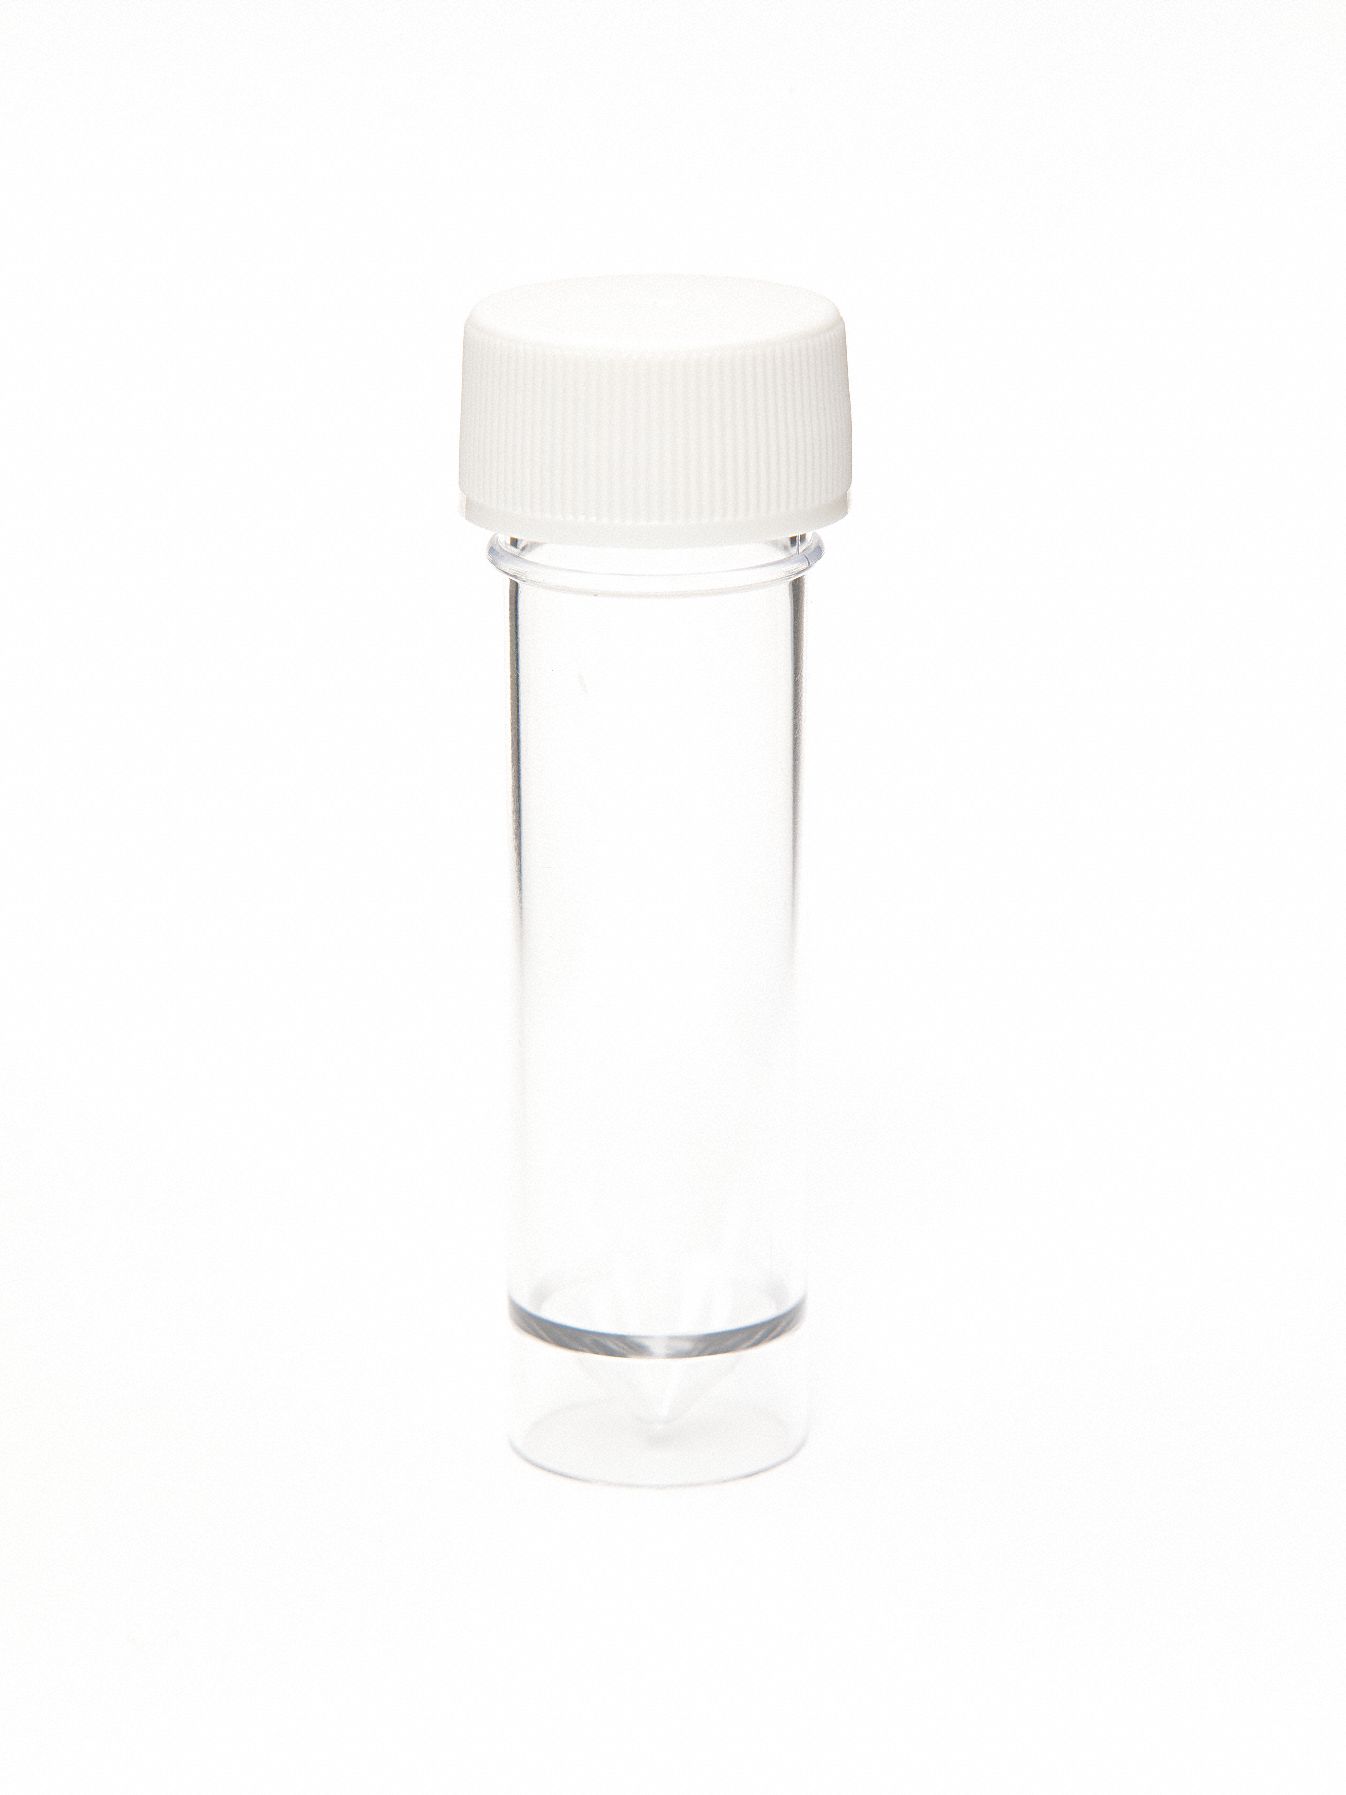 30mL Sample Container, Wide Mouth, Polystyrene, PK 400